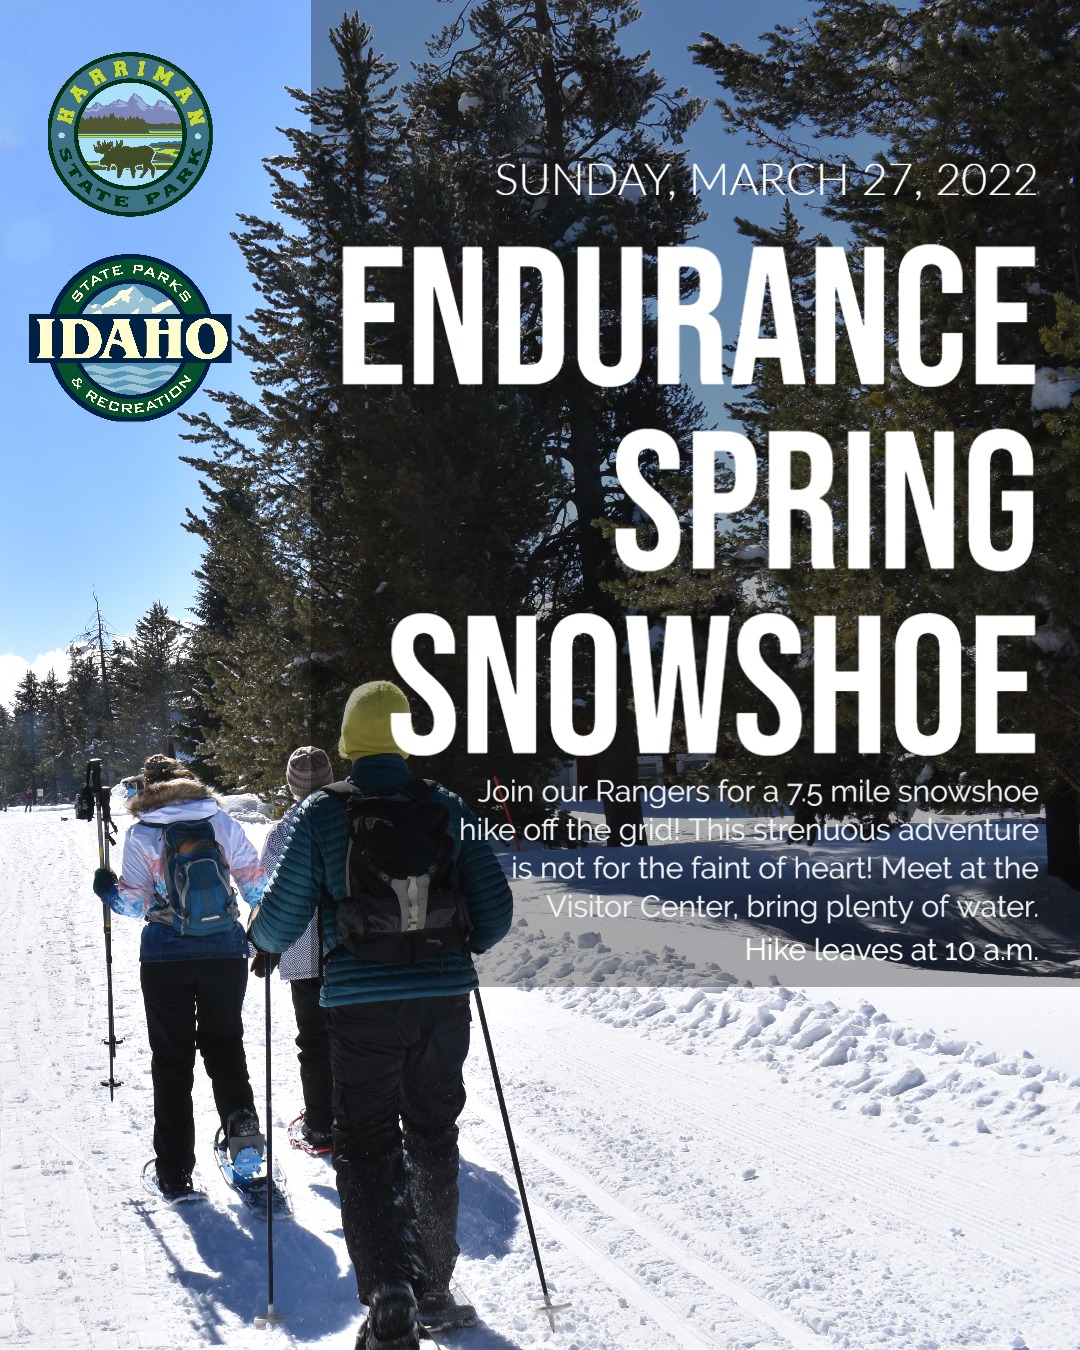 Join our Rangers for a 7.5 mile snowshoe hike off the grid! This strenuous adventure is not for the faint of heart, as you tackle heart attack hill and summit the caldera rim. Stop for a quick lunch at the Ridge Overlook and enjoy incredible views of the Teton Range and Park from the mountain side. Meet at the Visitor Center, dress for cold winter climate, bring functioning snowshoes that can handle deep powder, and a day pack with lunch and plenty of water. This is a free event. Winter access and motor vehicle entrance fees still apply. ASL Interpretation is available at no cost. Please submit a request seven days, preferably two weeks, in advance by calling 208.558.7368 or by emailing har@idpr.idaho.gov. COVID-19: Park programs follow CDC guidelines.